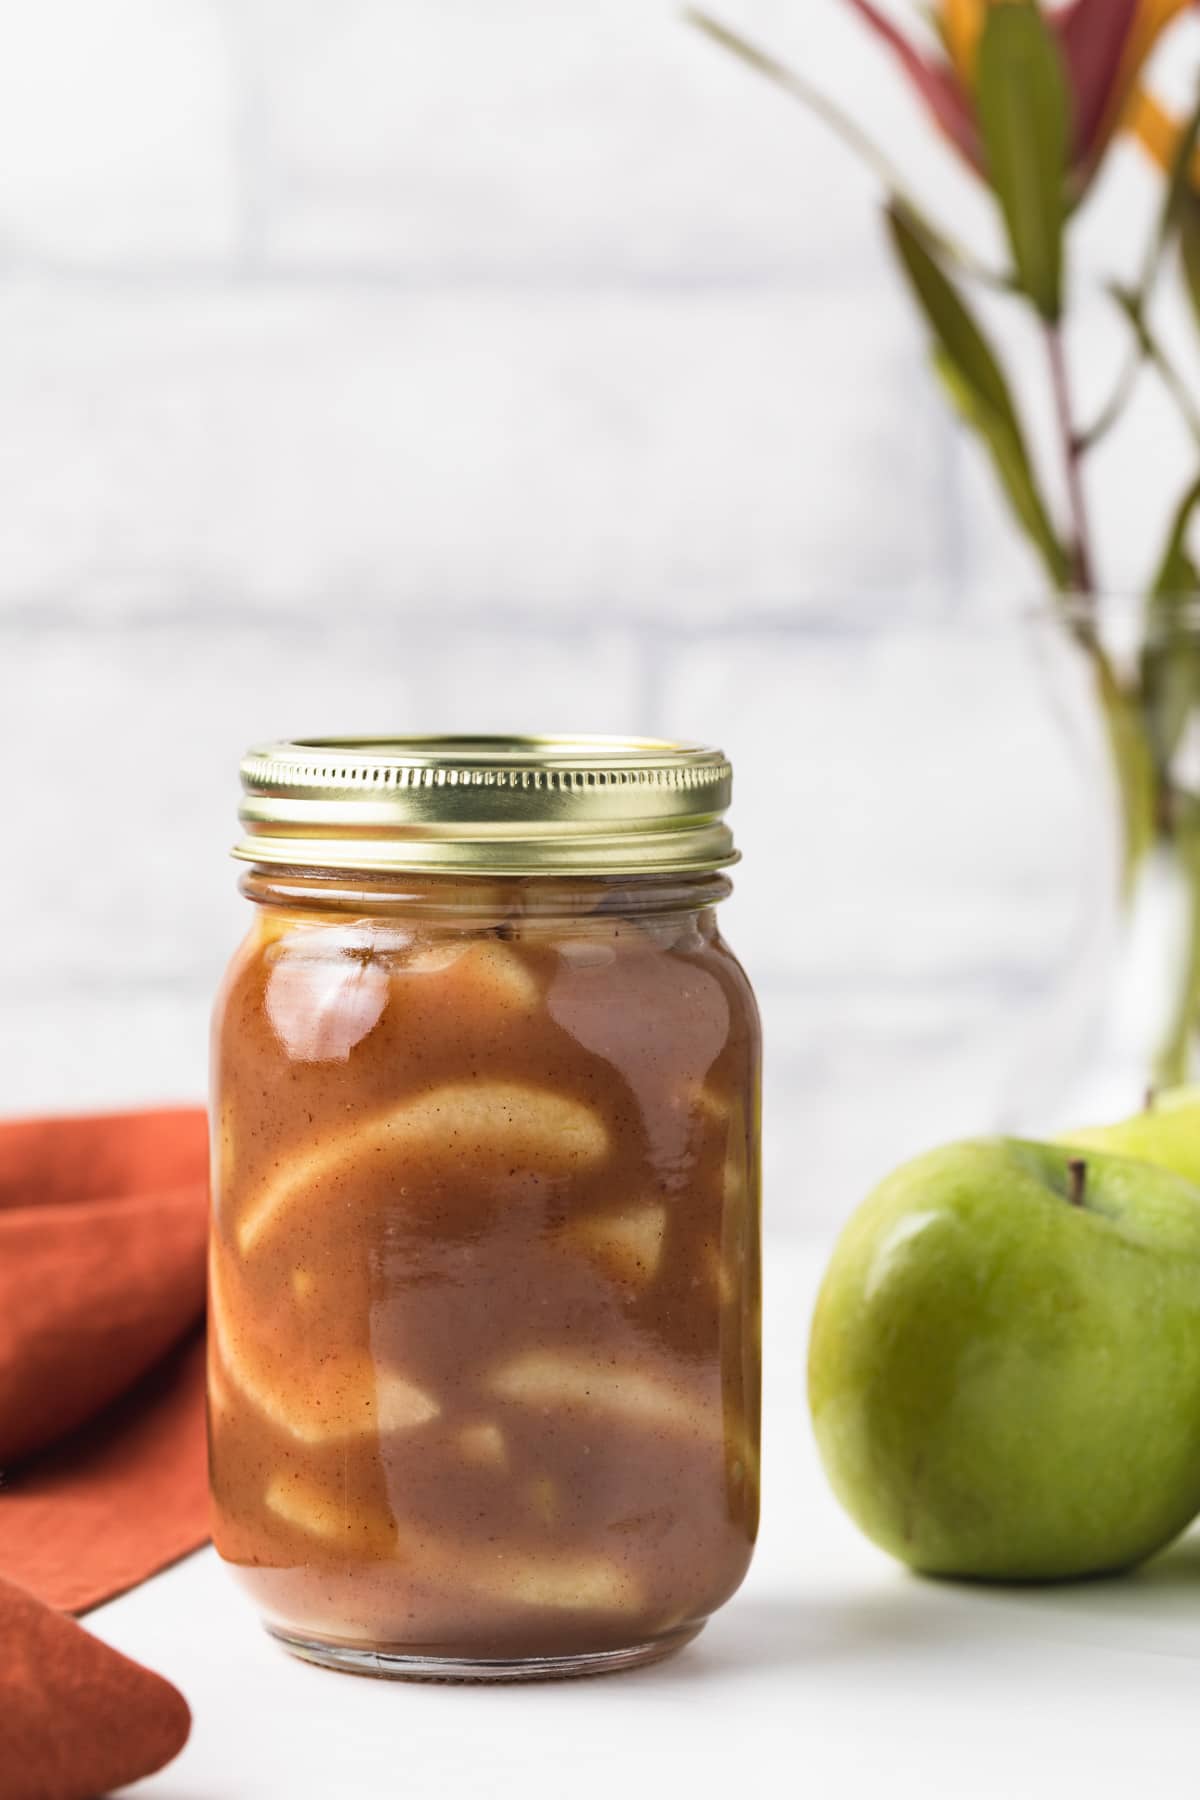 apple pie filling in glass jar next to green apples and orange napkin